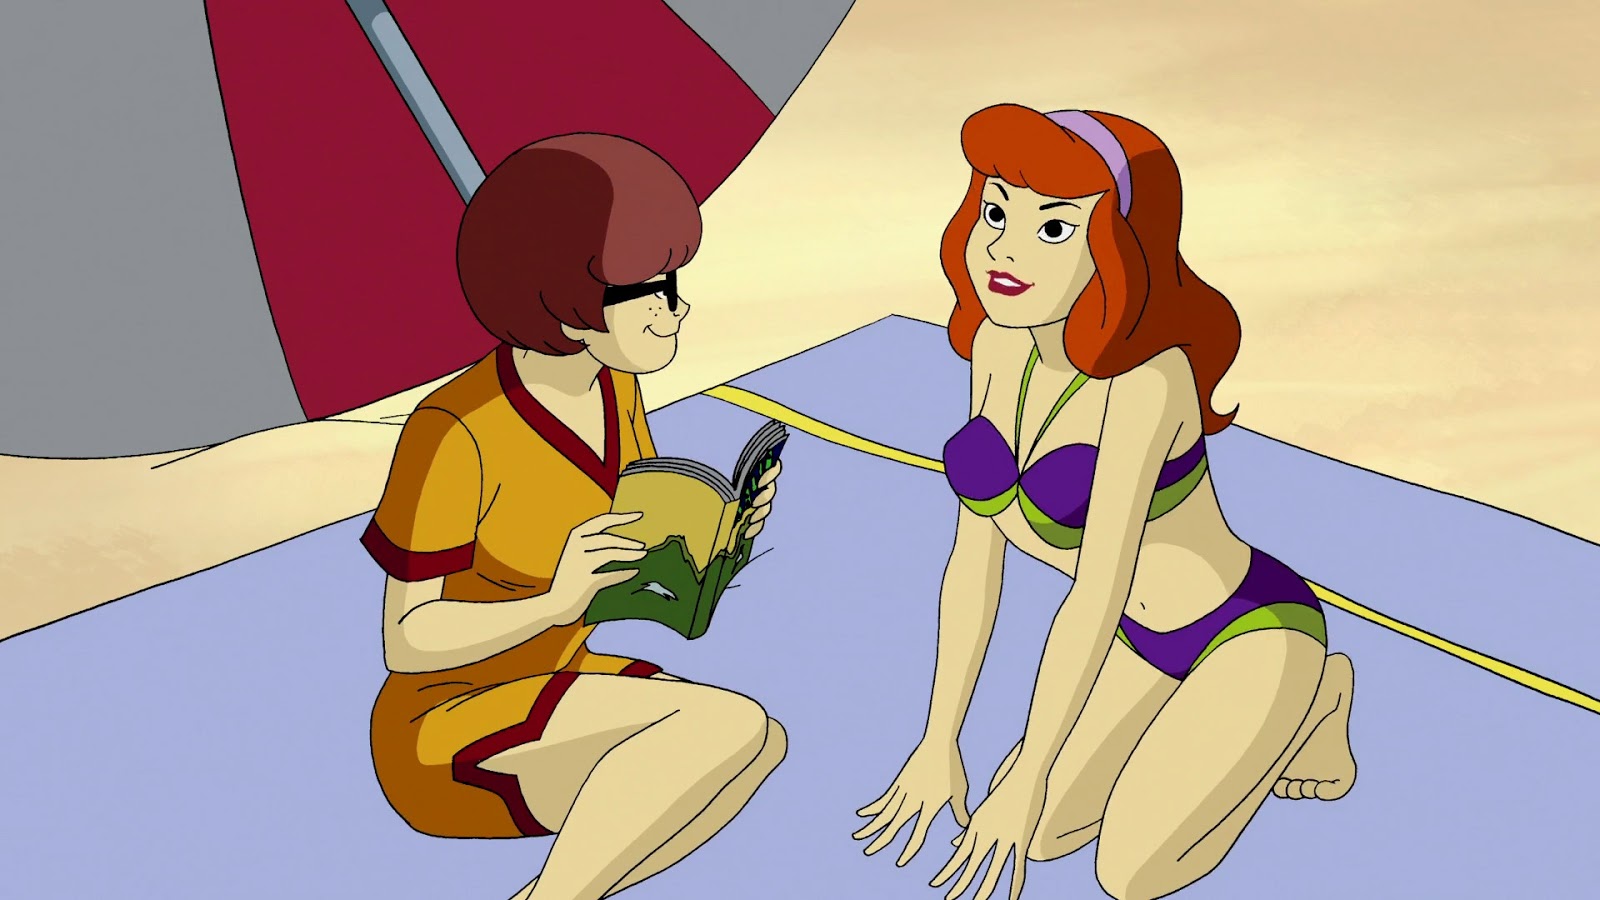 daphne blake bikini from: Scooby doo and the lengend of the vampiters movie...